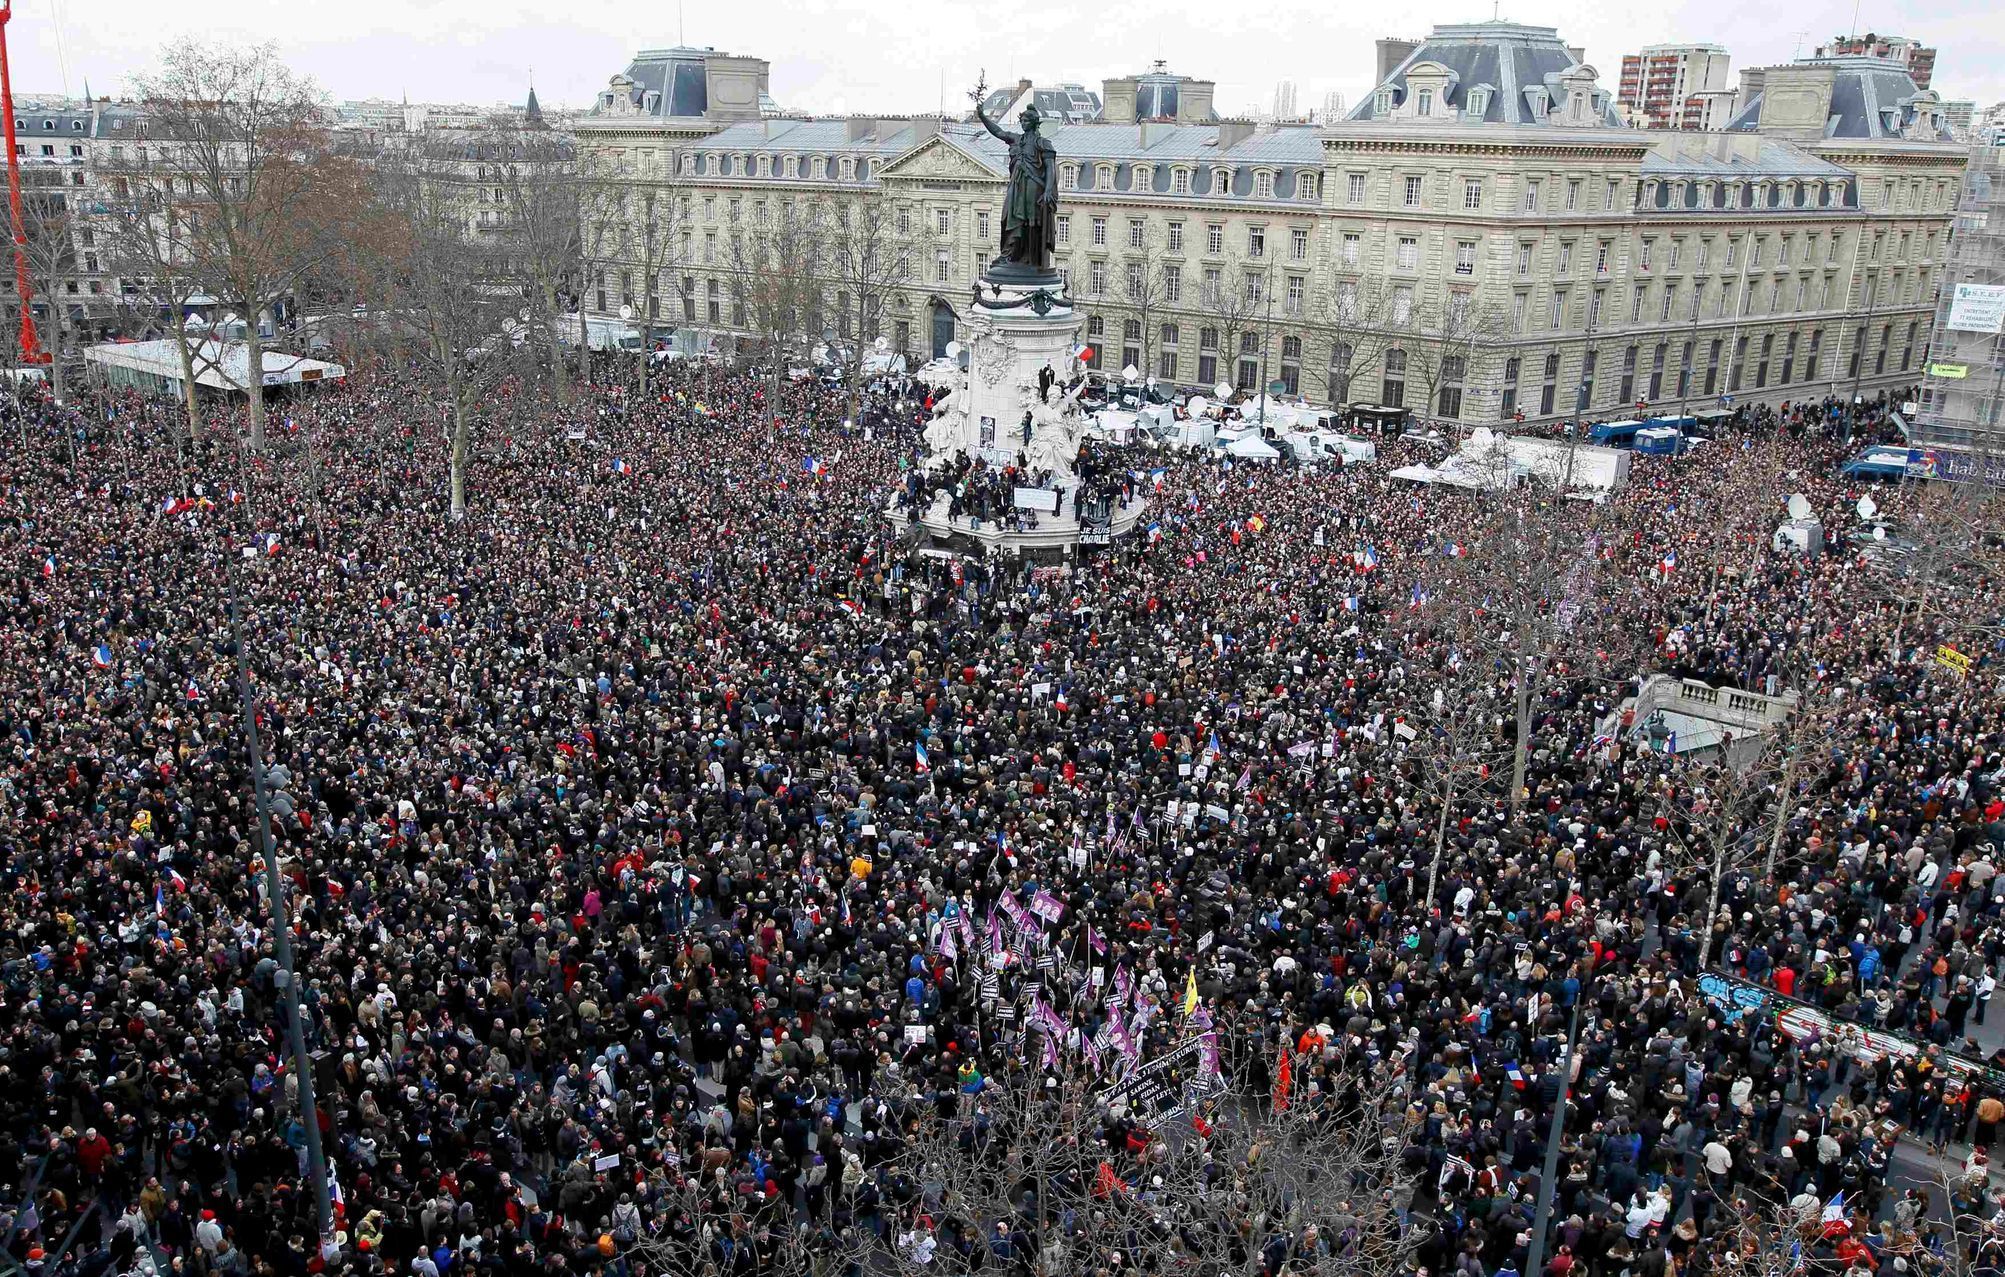 A general view shows Hundreds of thousands of people gathering on the Place de la Republique to attend the solidarity march (Rassemblement Republicain) in the streets of Paris